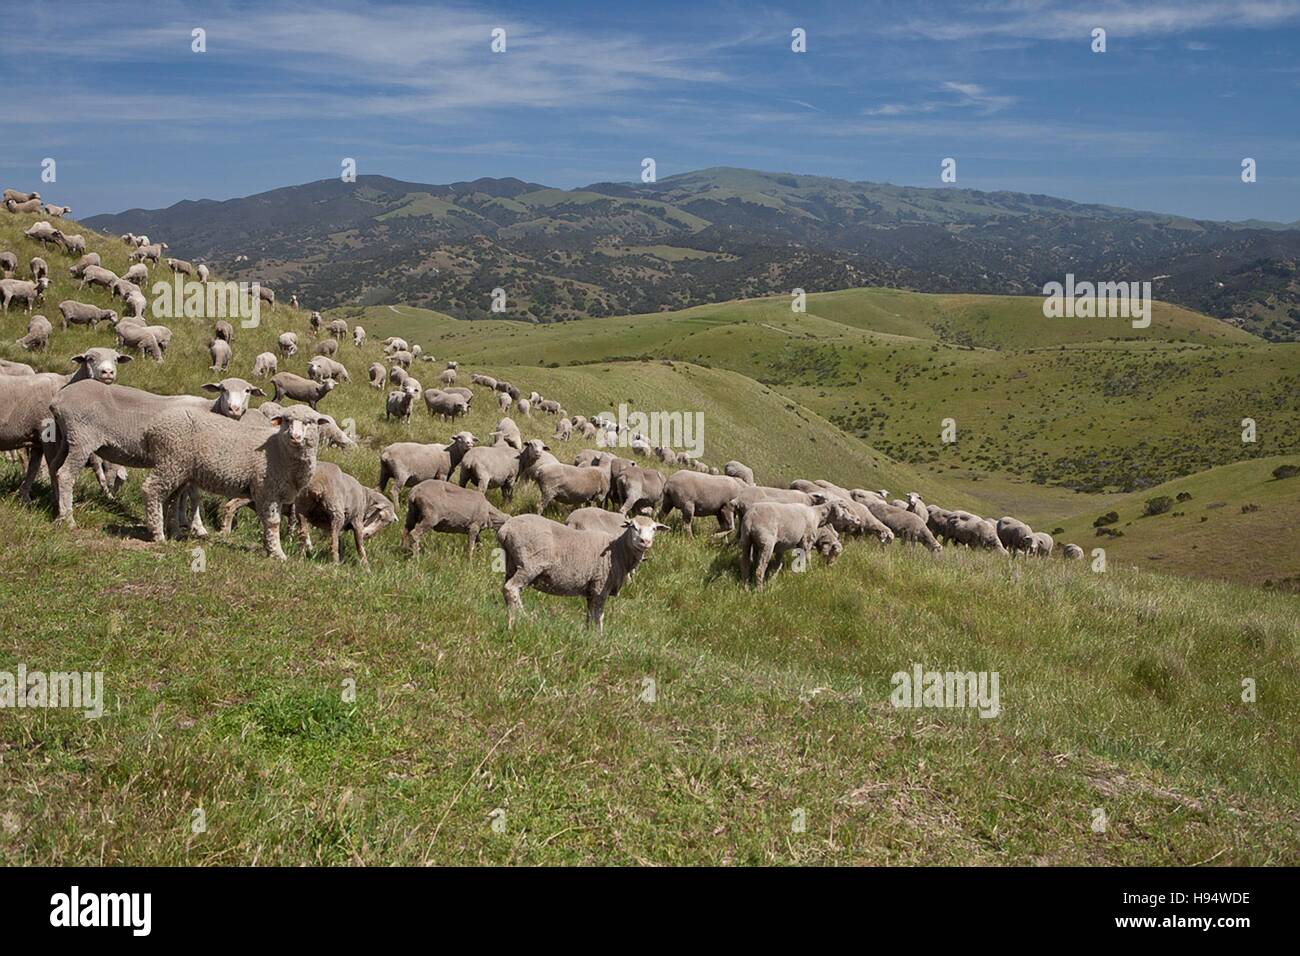 A herd of sheep graze on the rolling hills of the Fort Ord National Monument April 26, 2011 near Old Hilltown, Monterey County, California. Stock Photo